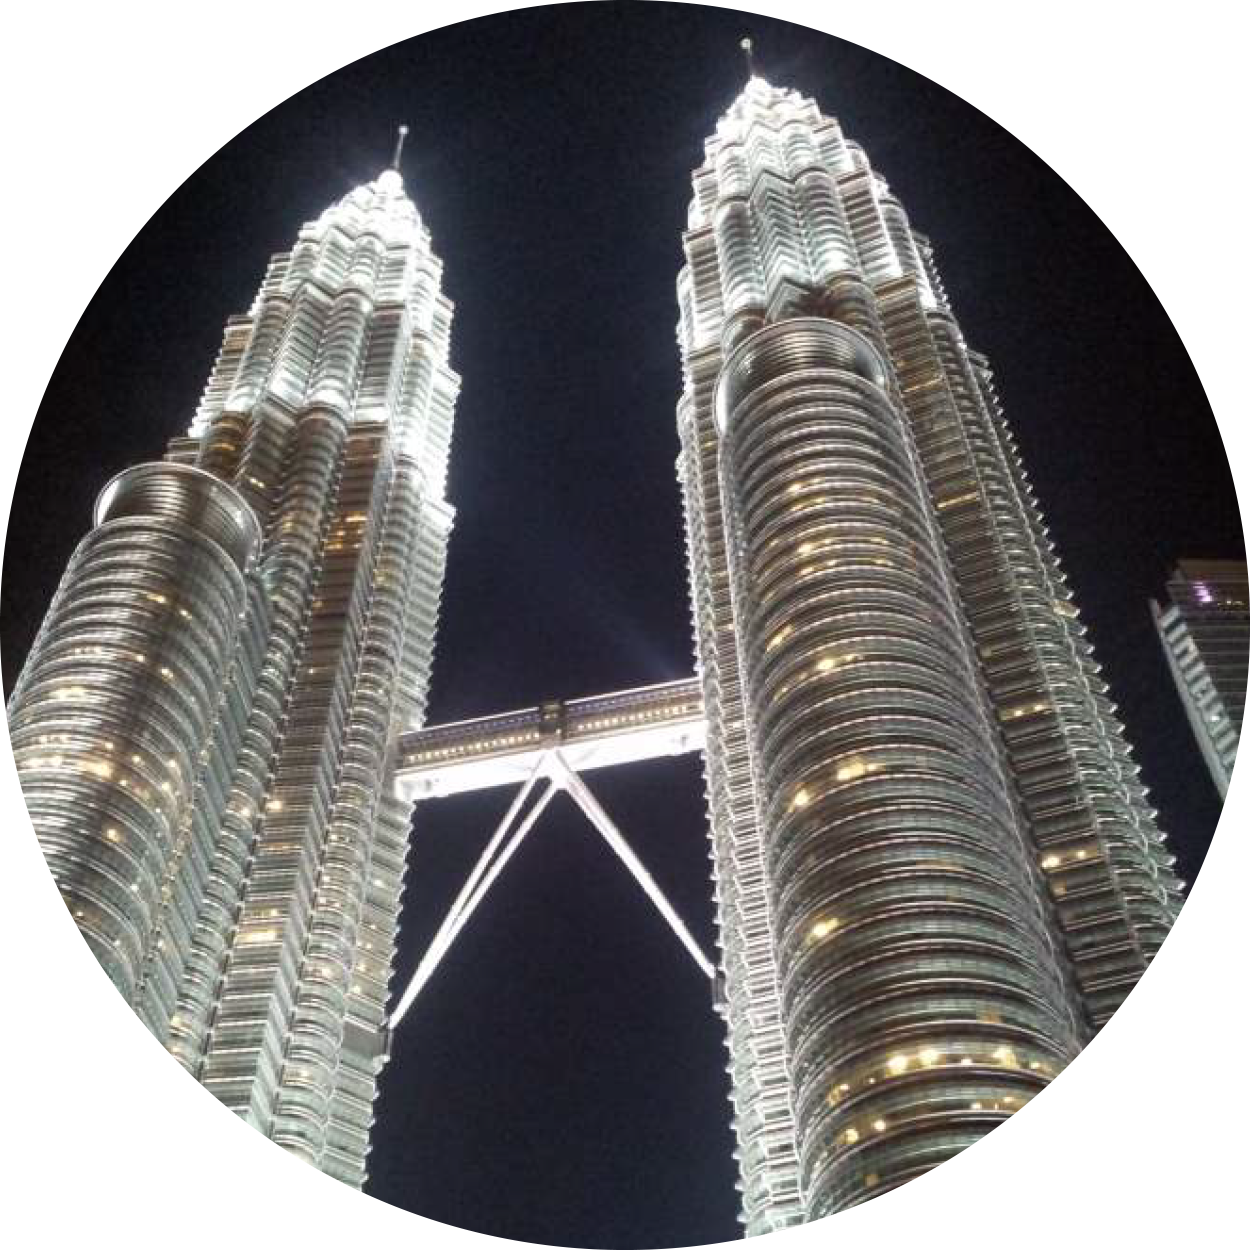 An inmage of the Petronas Twin Towers from the Kuala Lumpur city tour package conducted by the dedicated Malaysian tour guides here at MM Adventure, representing the vibrant, historical cities you can explore when travelling in and around Kuala Lumpur, Malaysia.